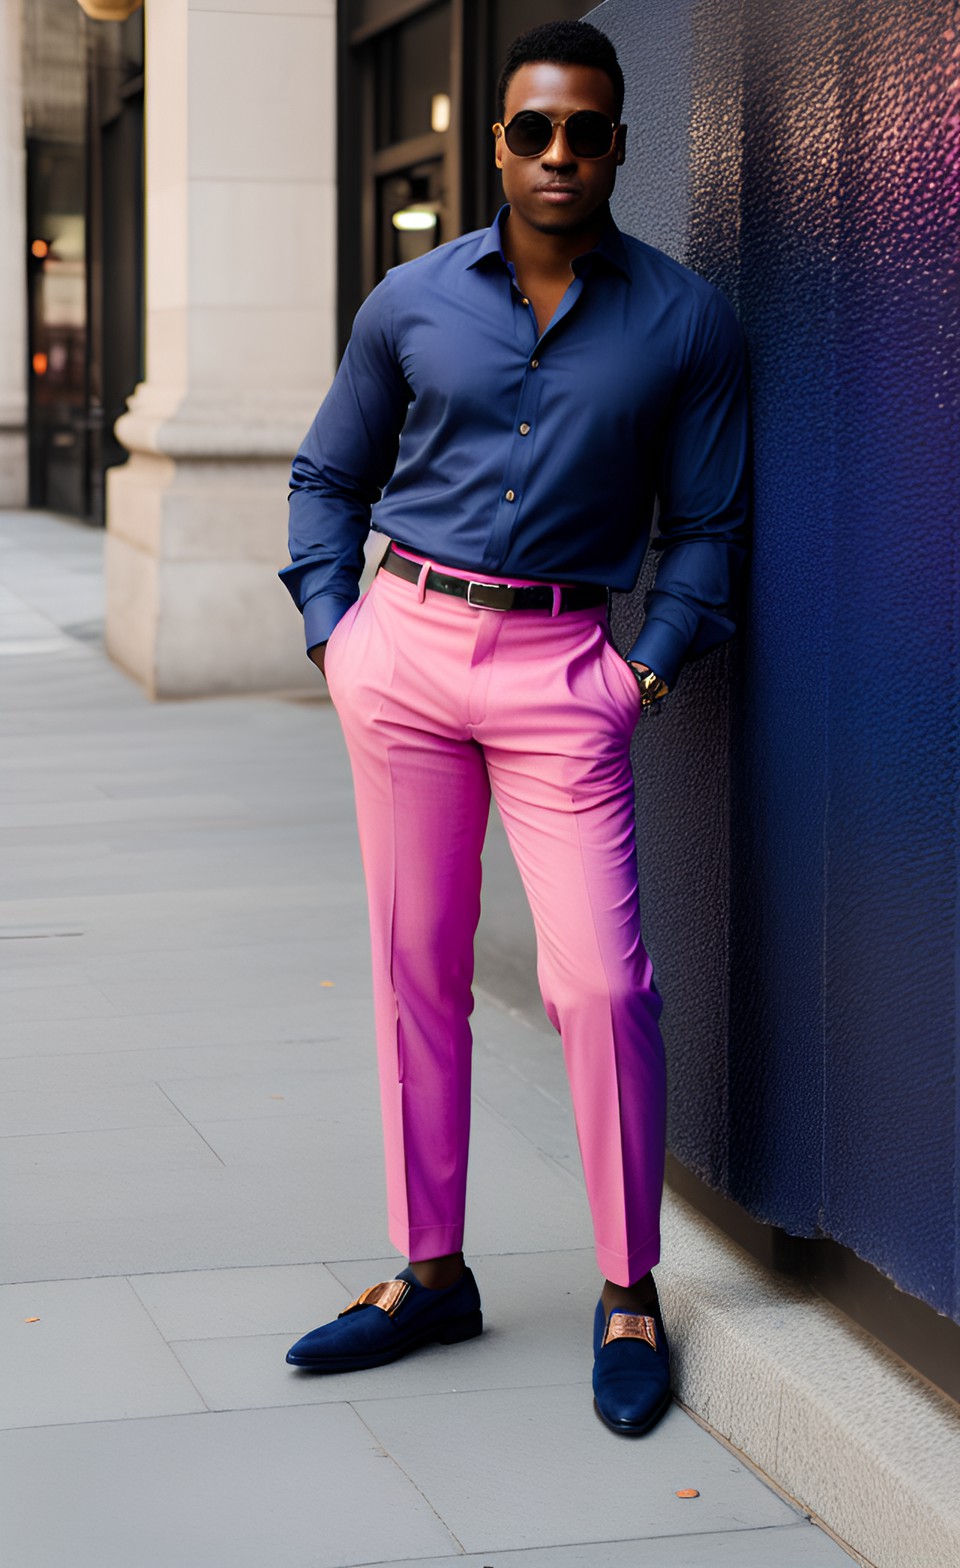 ai generated image of man wearing navy blue shirt with pink trousers